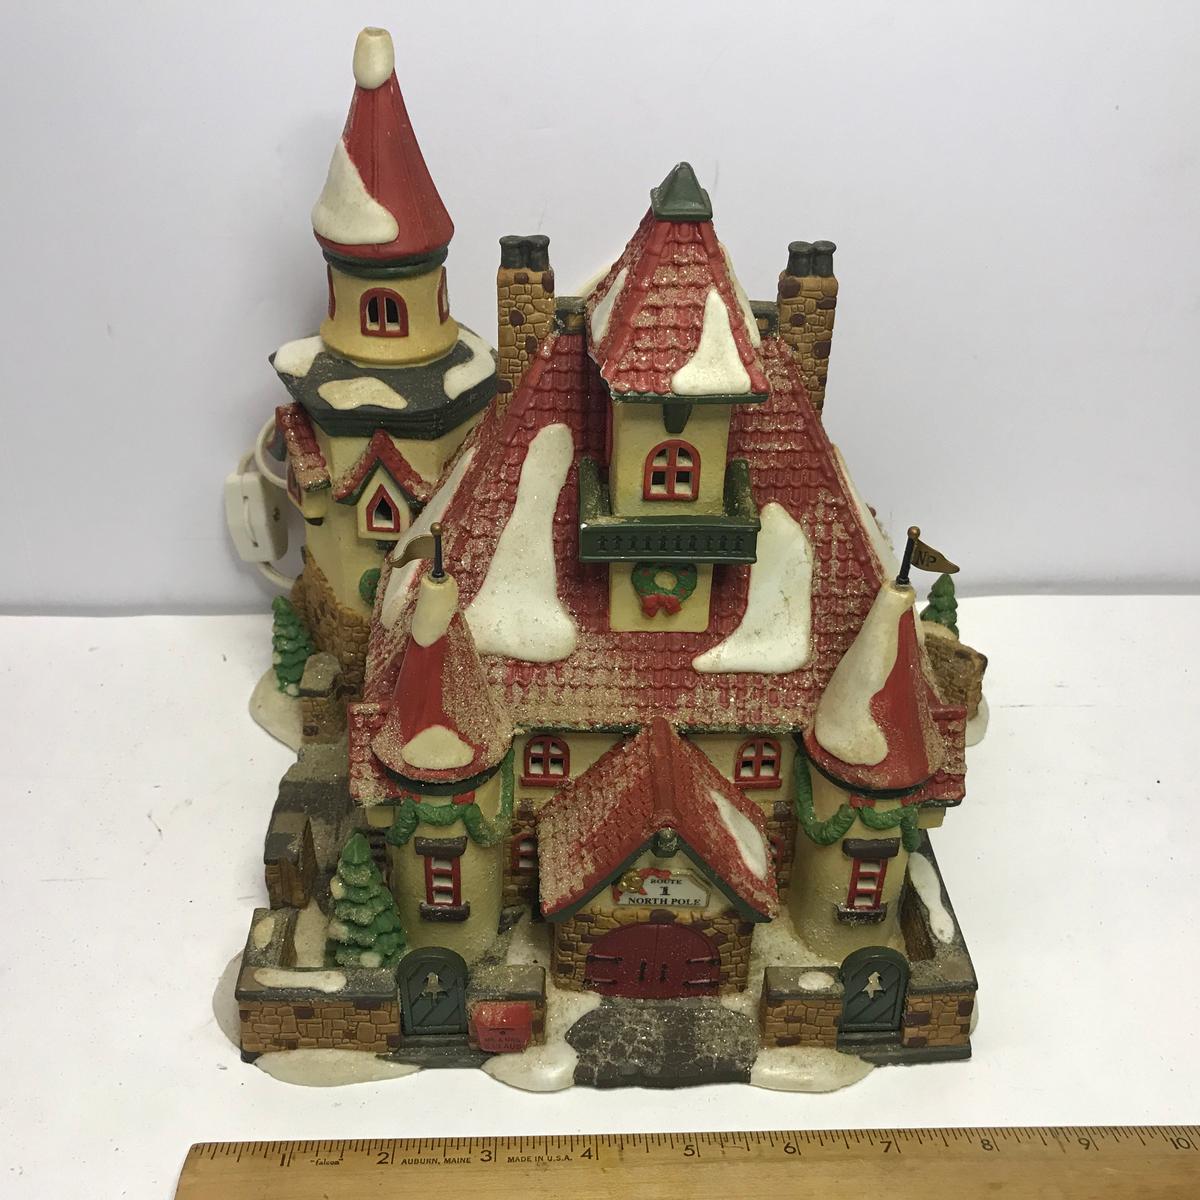 Department 56 North Pole Series "Route 1 North Pole Home of Mr. & Mrs. Claus" Lighted Village House